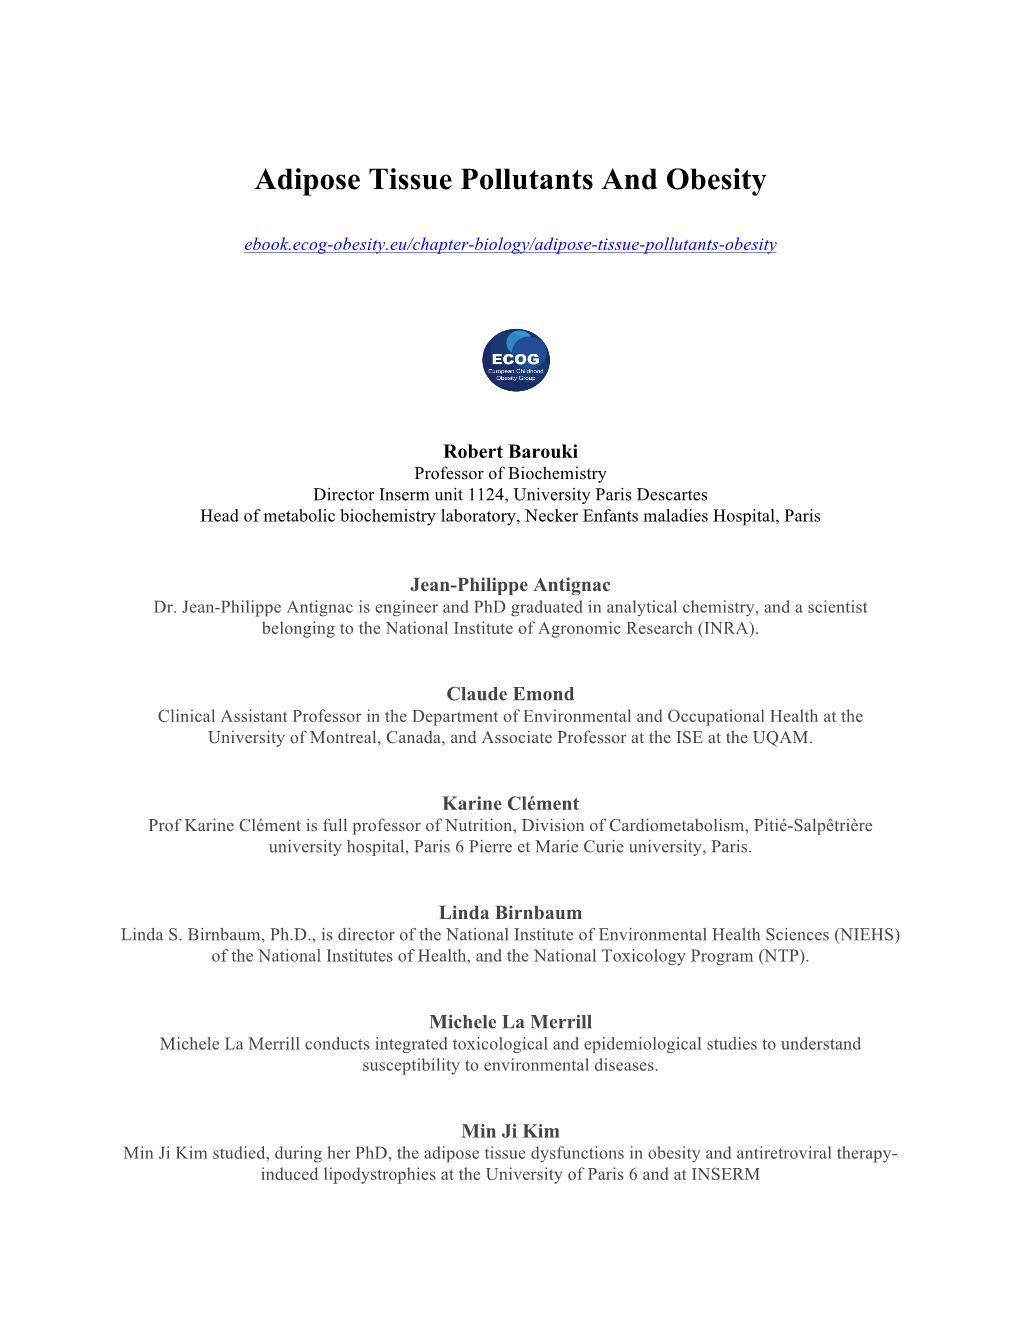 Adipose Tissue Pollutants and Obesity